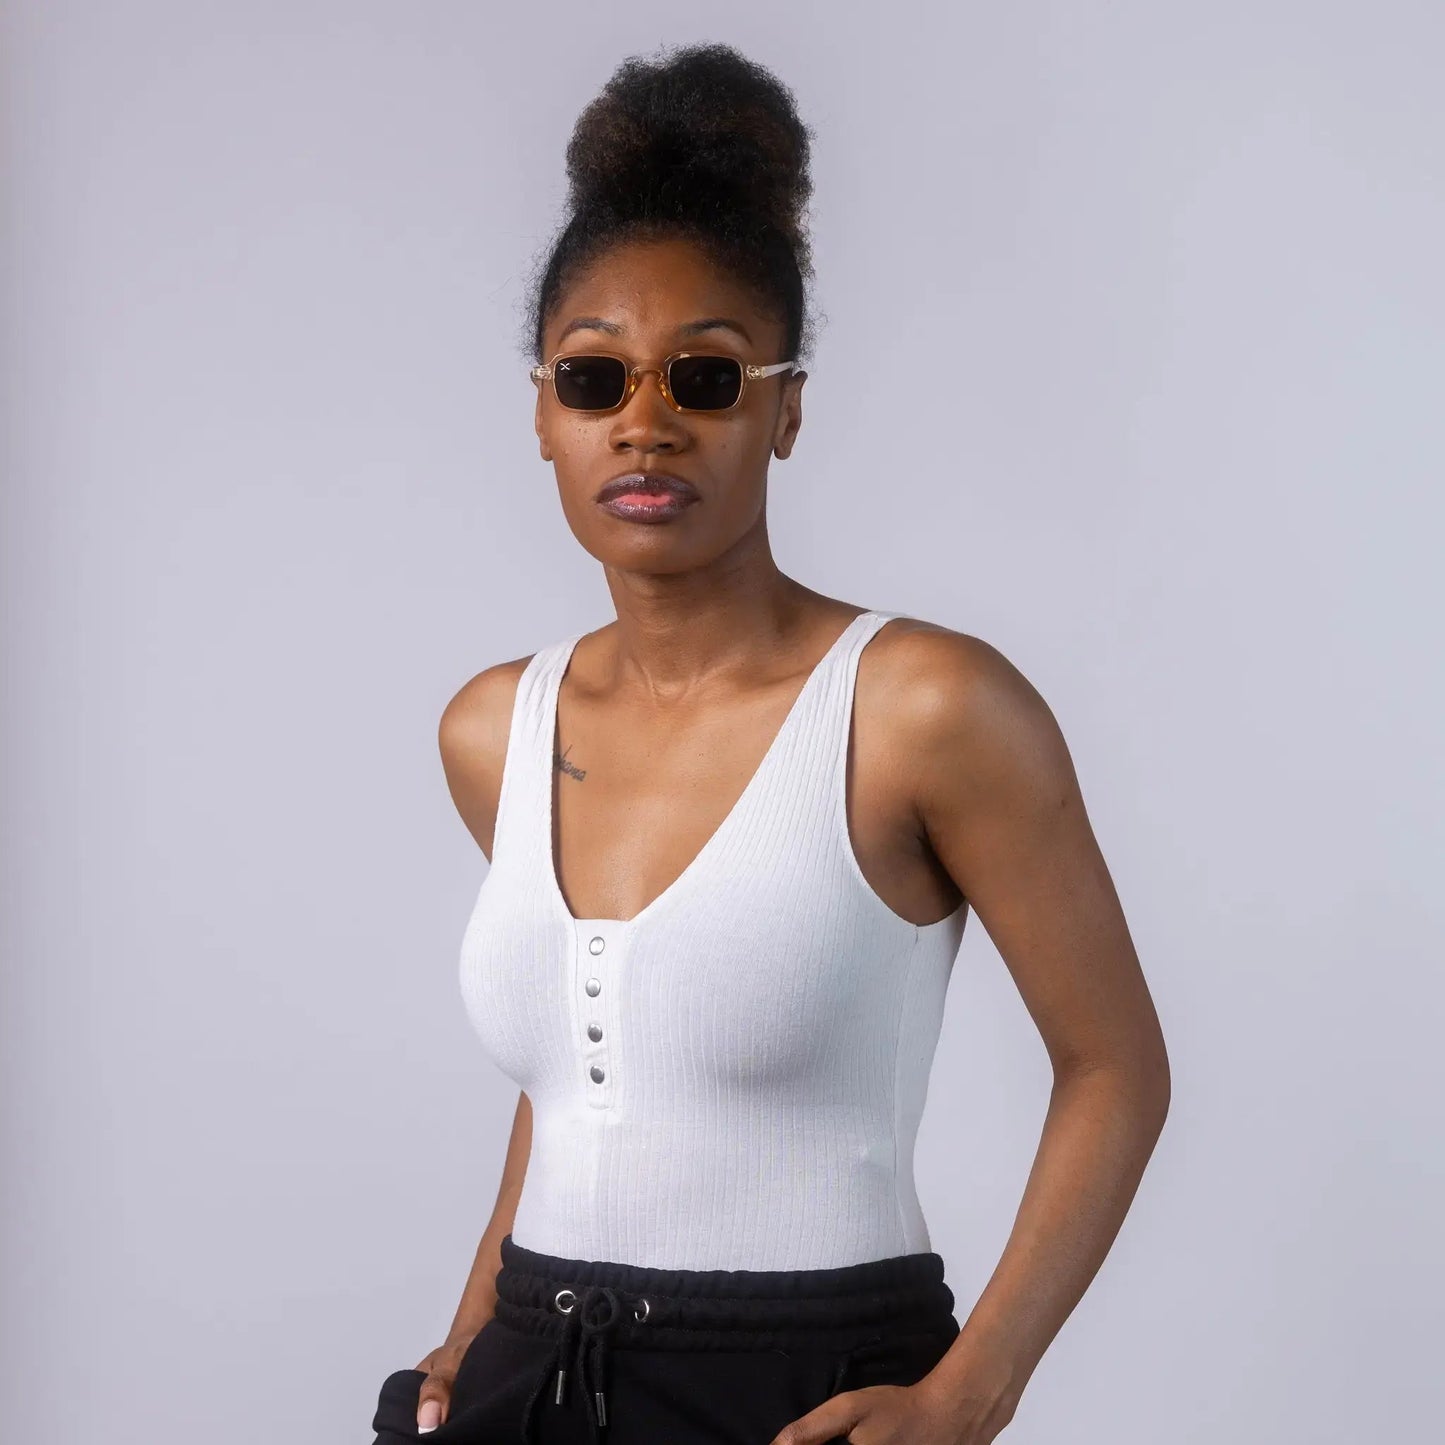 A female model wearing Exposure Sunglasses polarized sunglasses with beige frames and tinted lenses, posing against a white background.